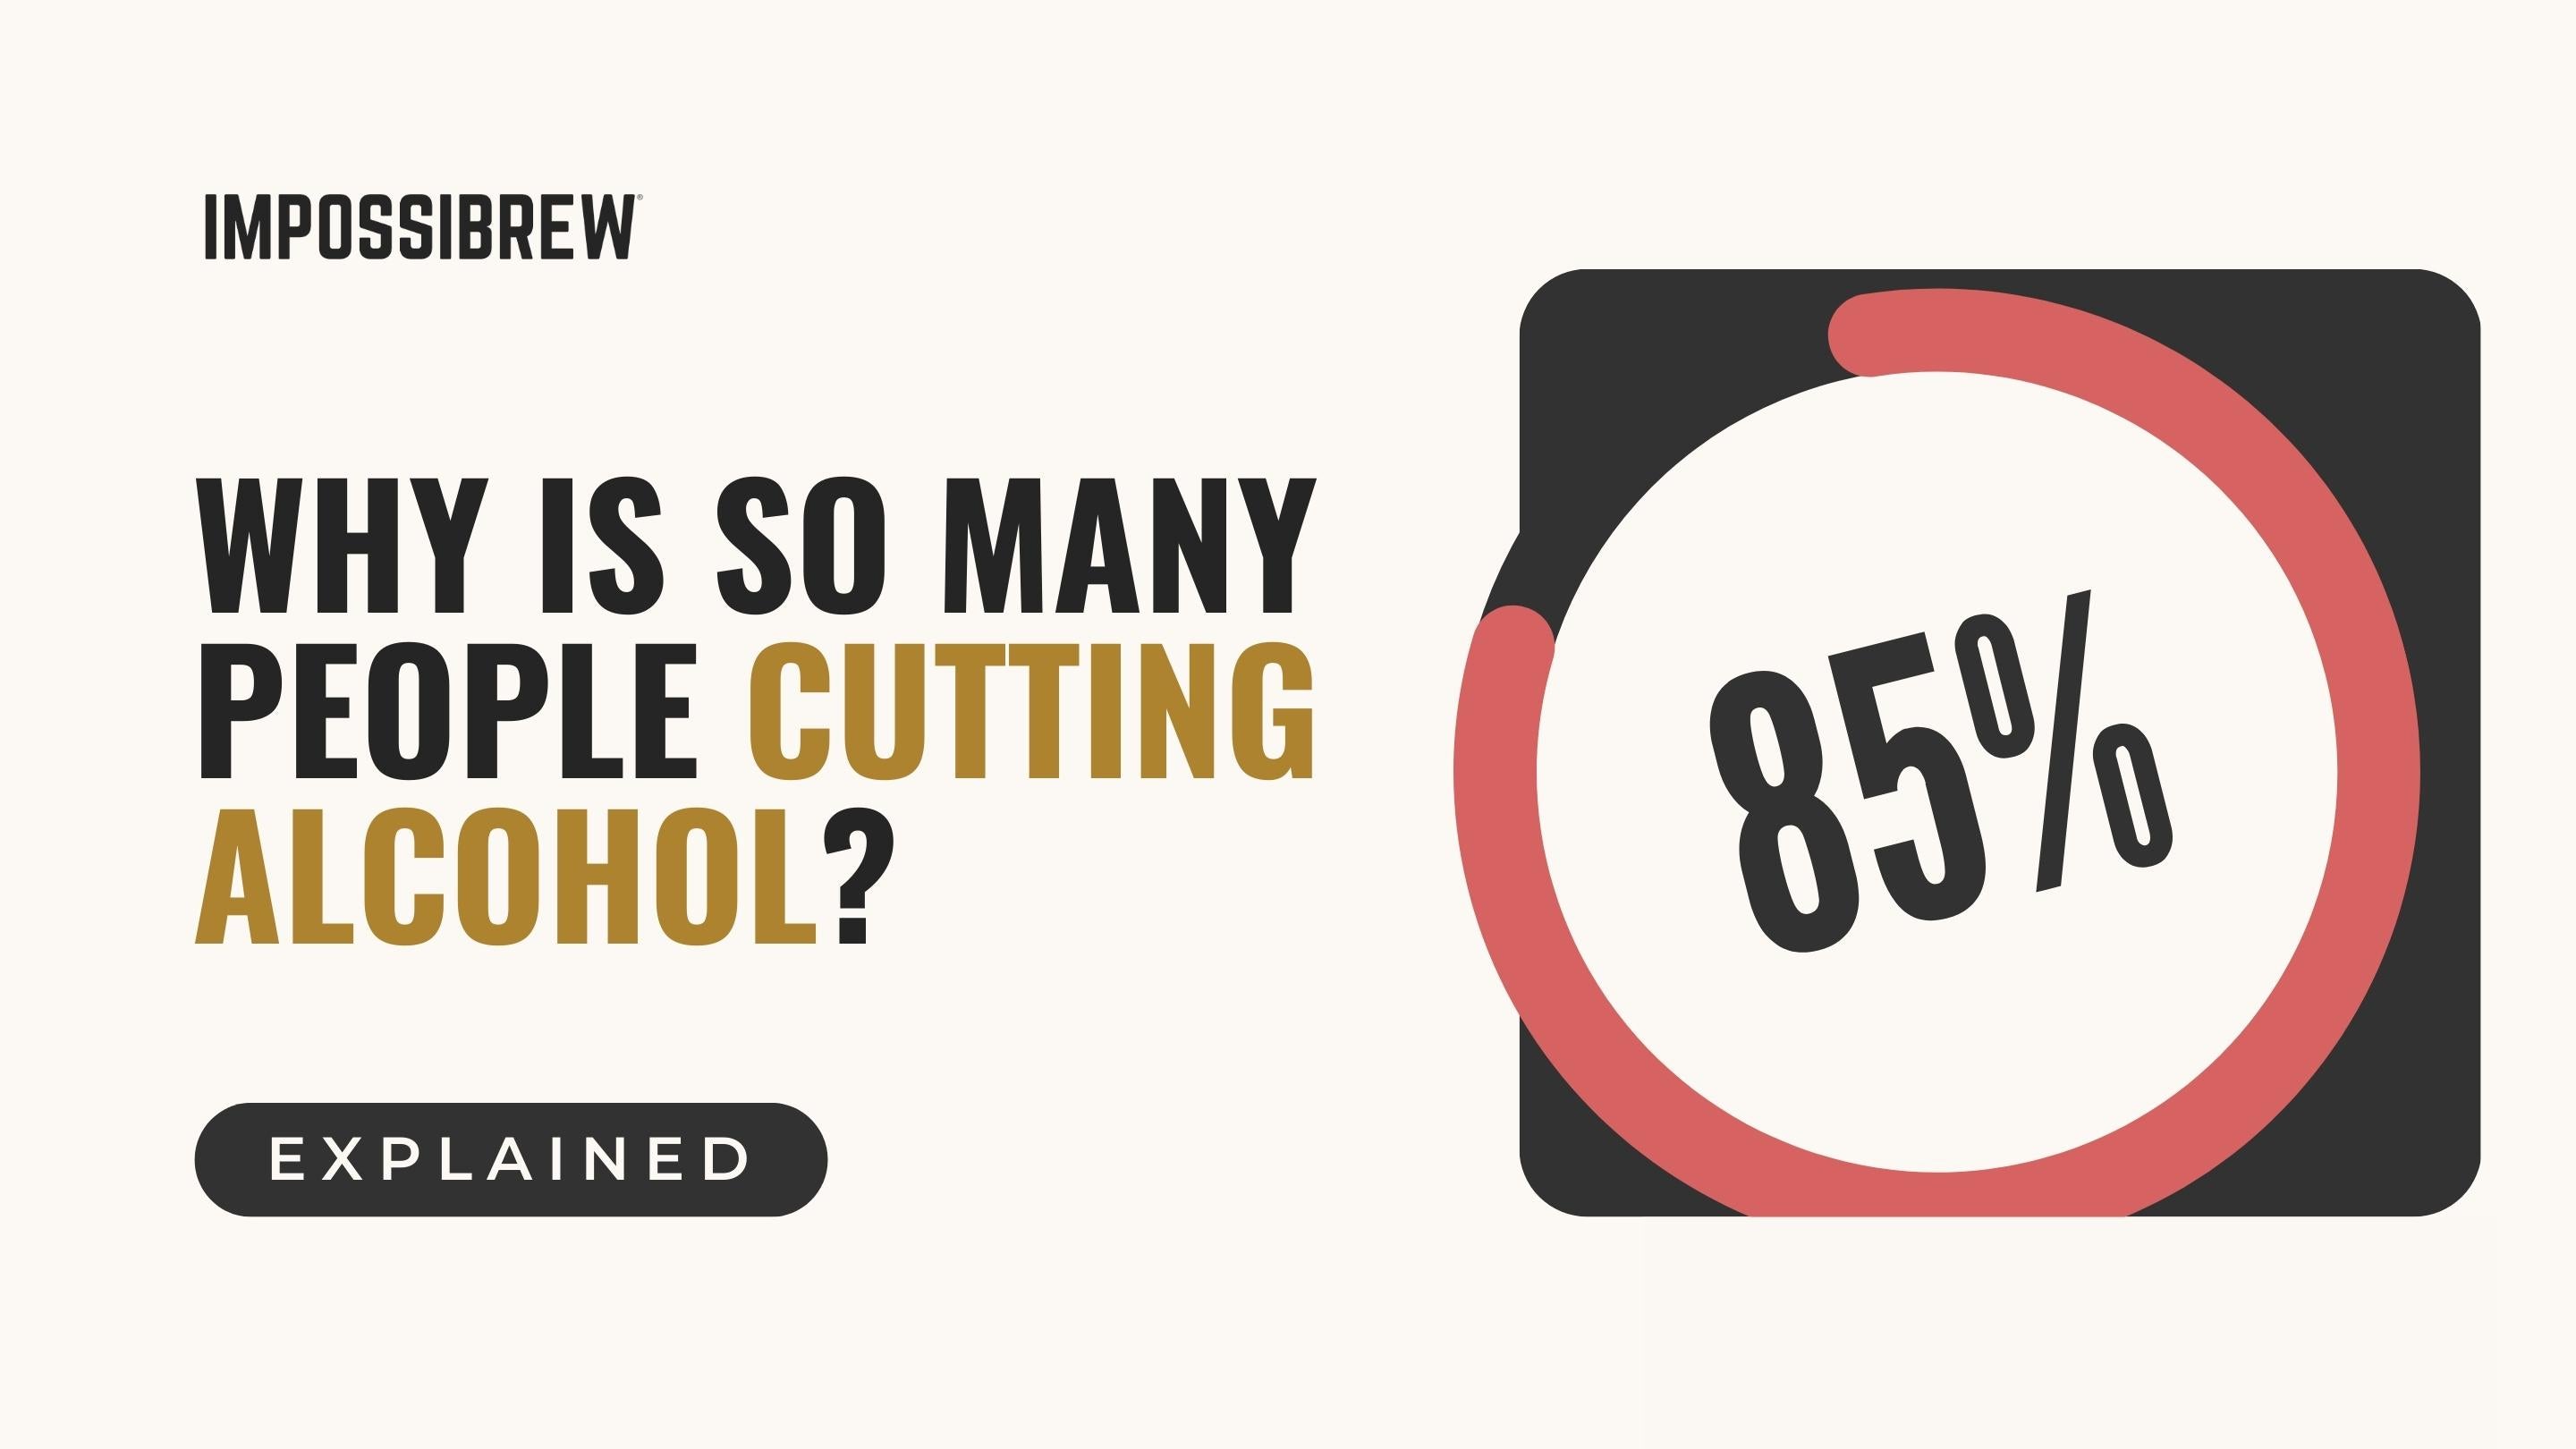 84% of Global Drinkers Are Trying To Cut Drinking - Here’s Why.